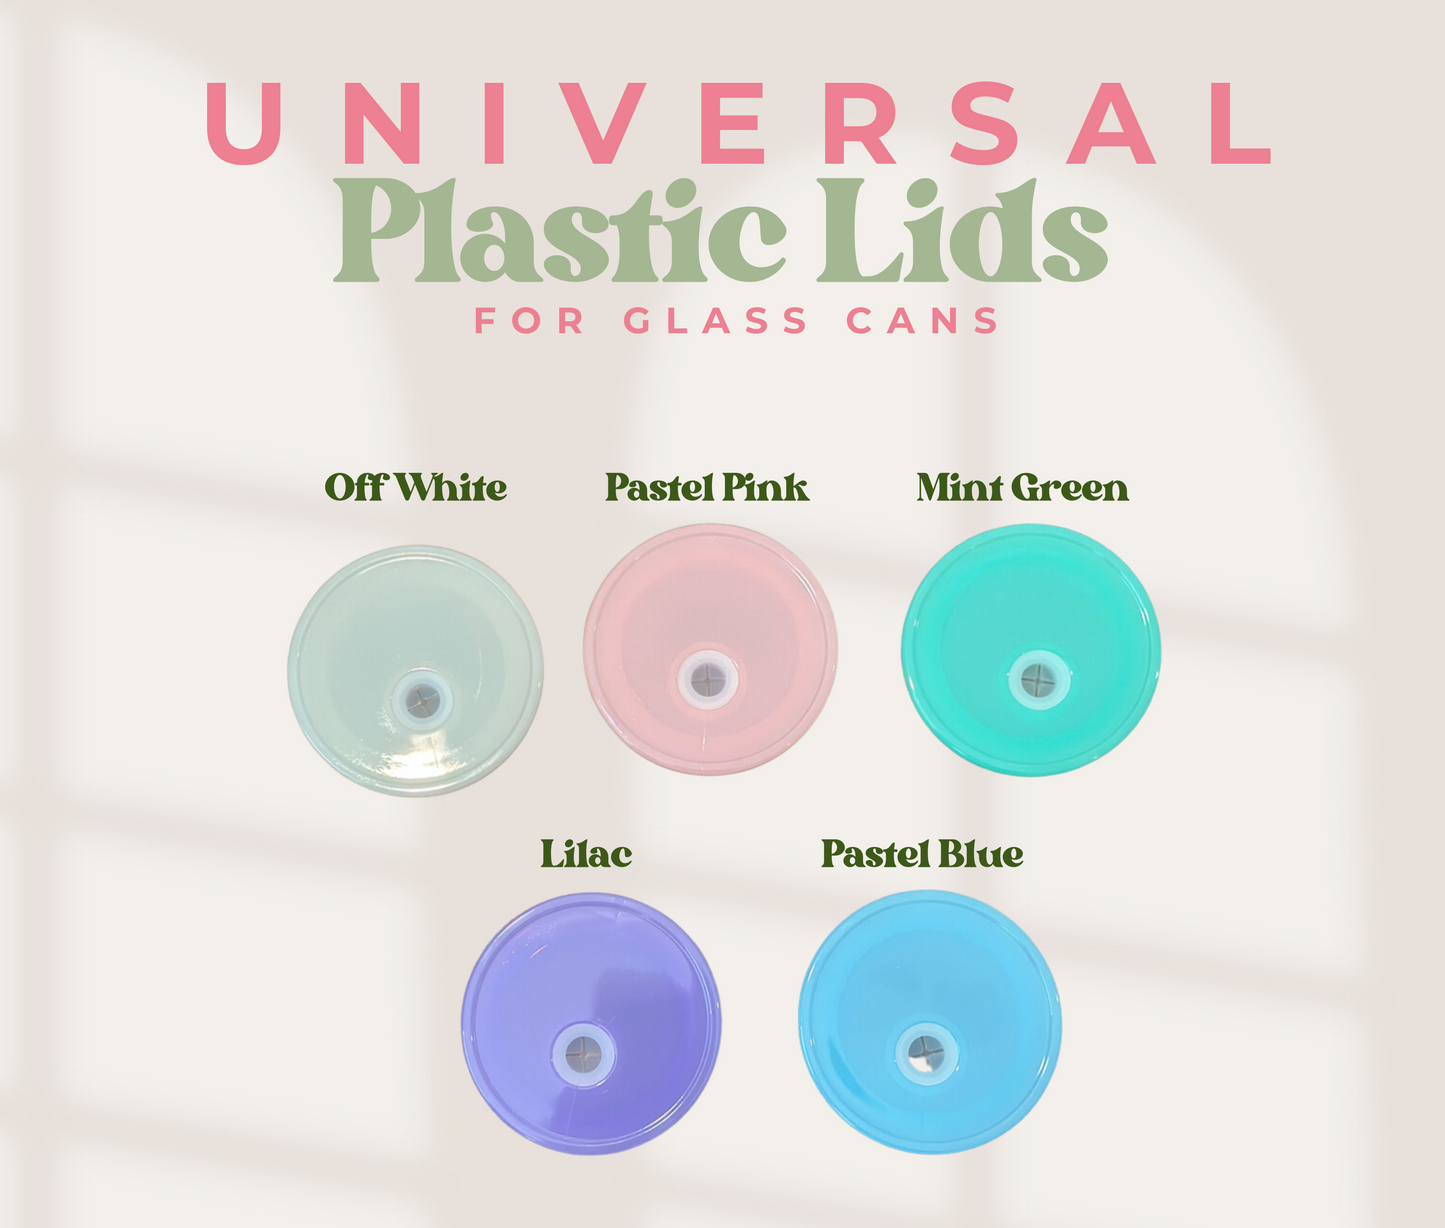 Universal Plastic Lids for Glass Can Cups